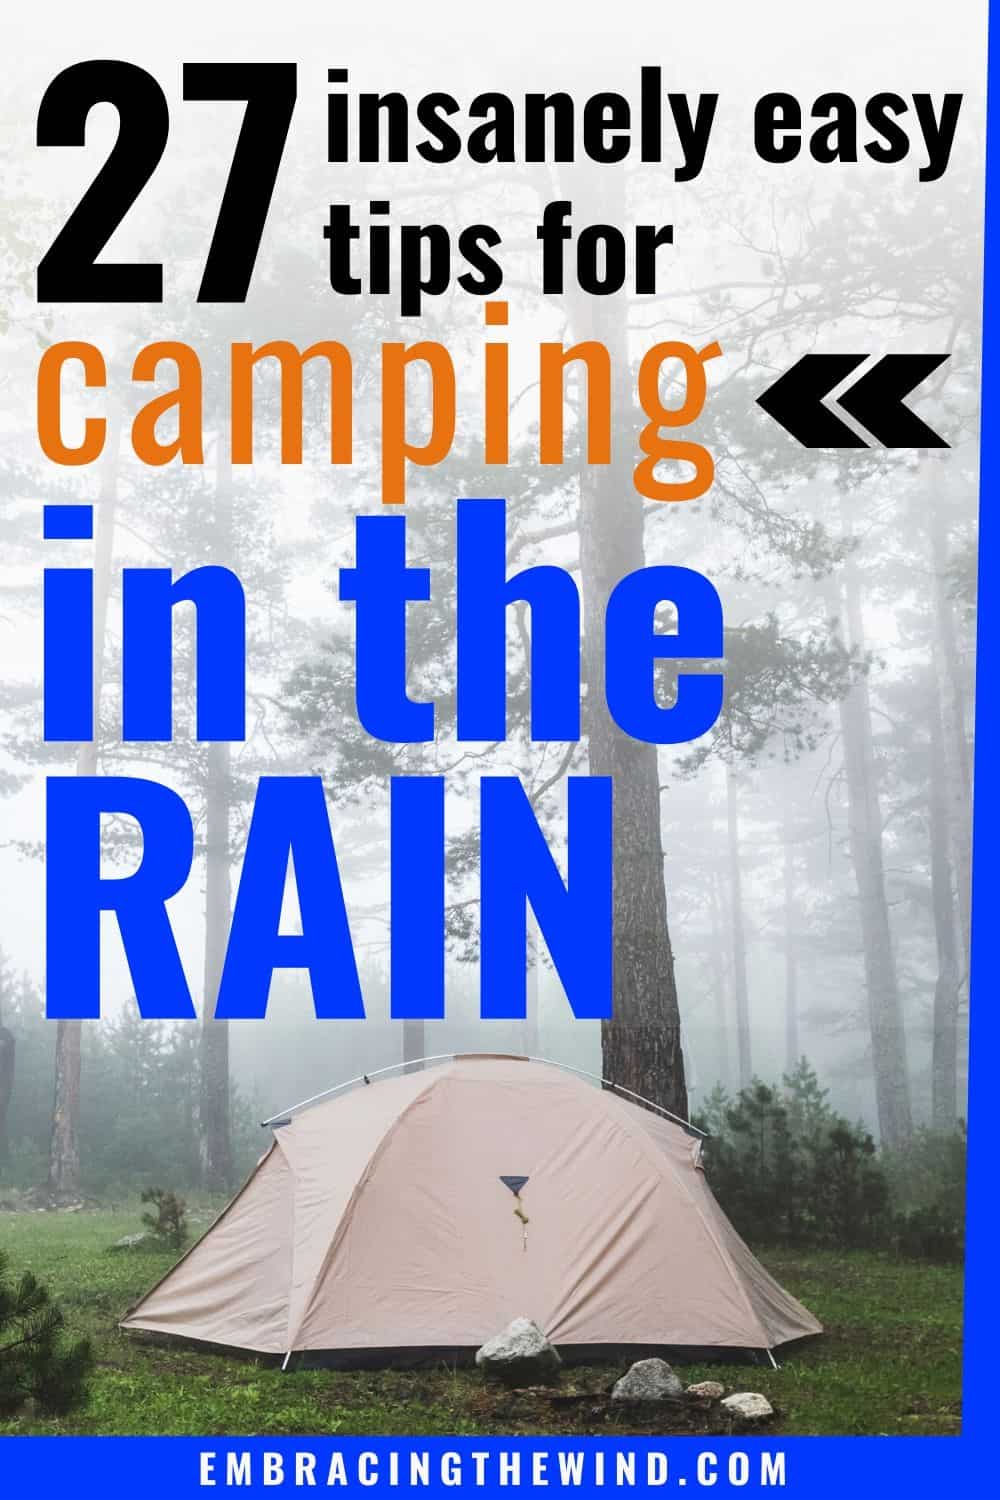 Tips for camping in the rain